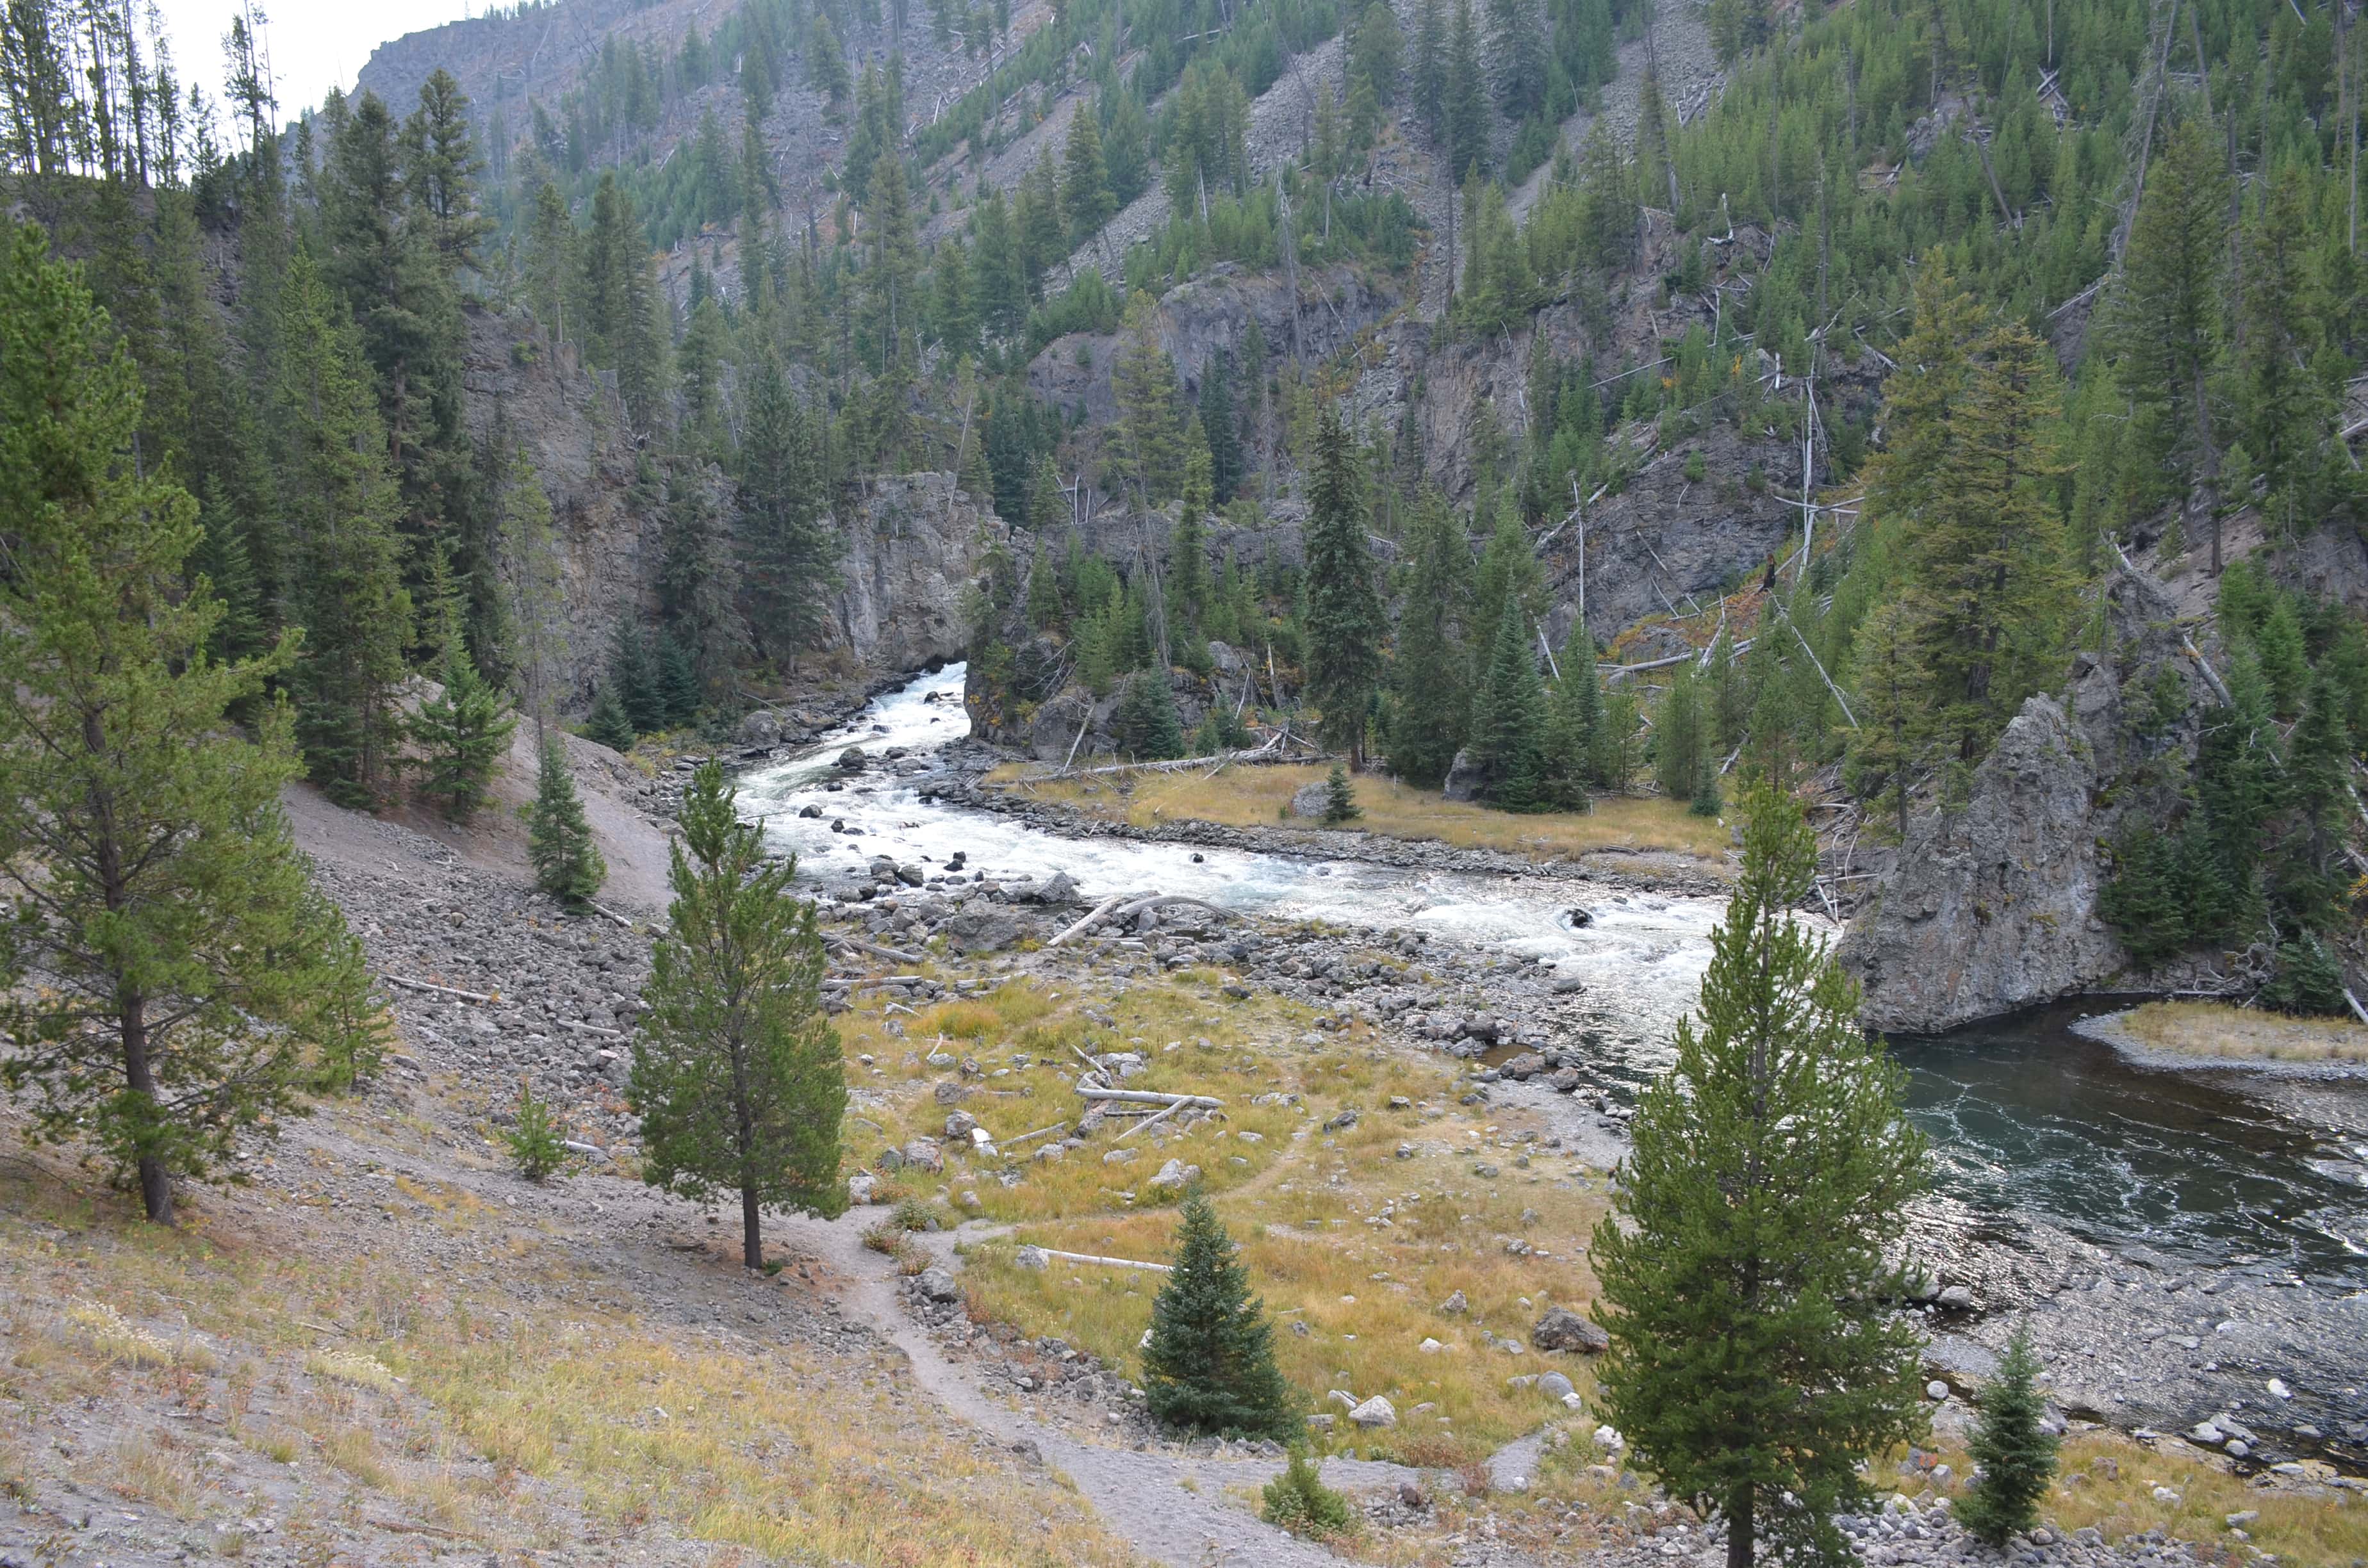 Firehole River at the beginning of the drive at Firehole Canyon Drive in Yellowstone National Park, Wyoming